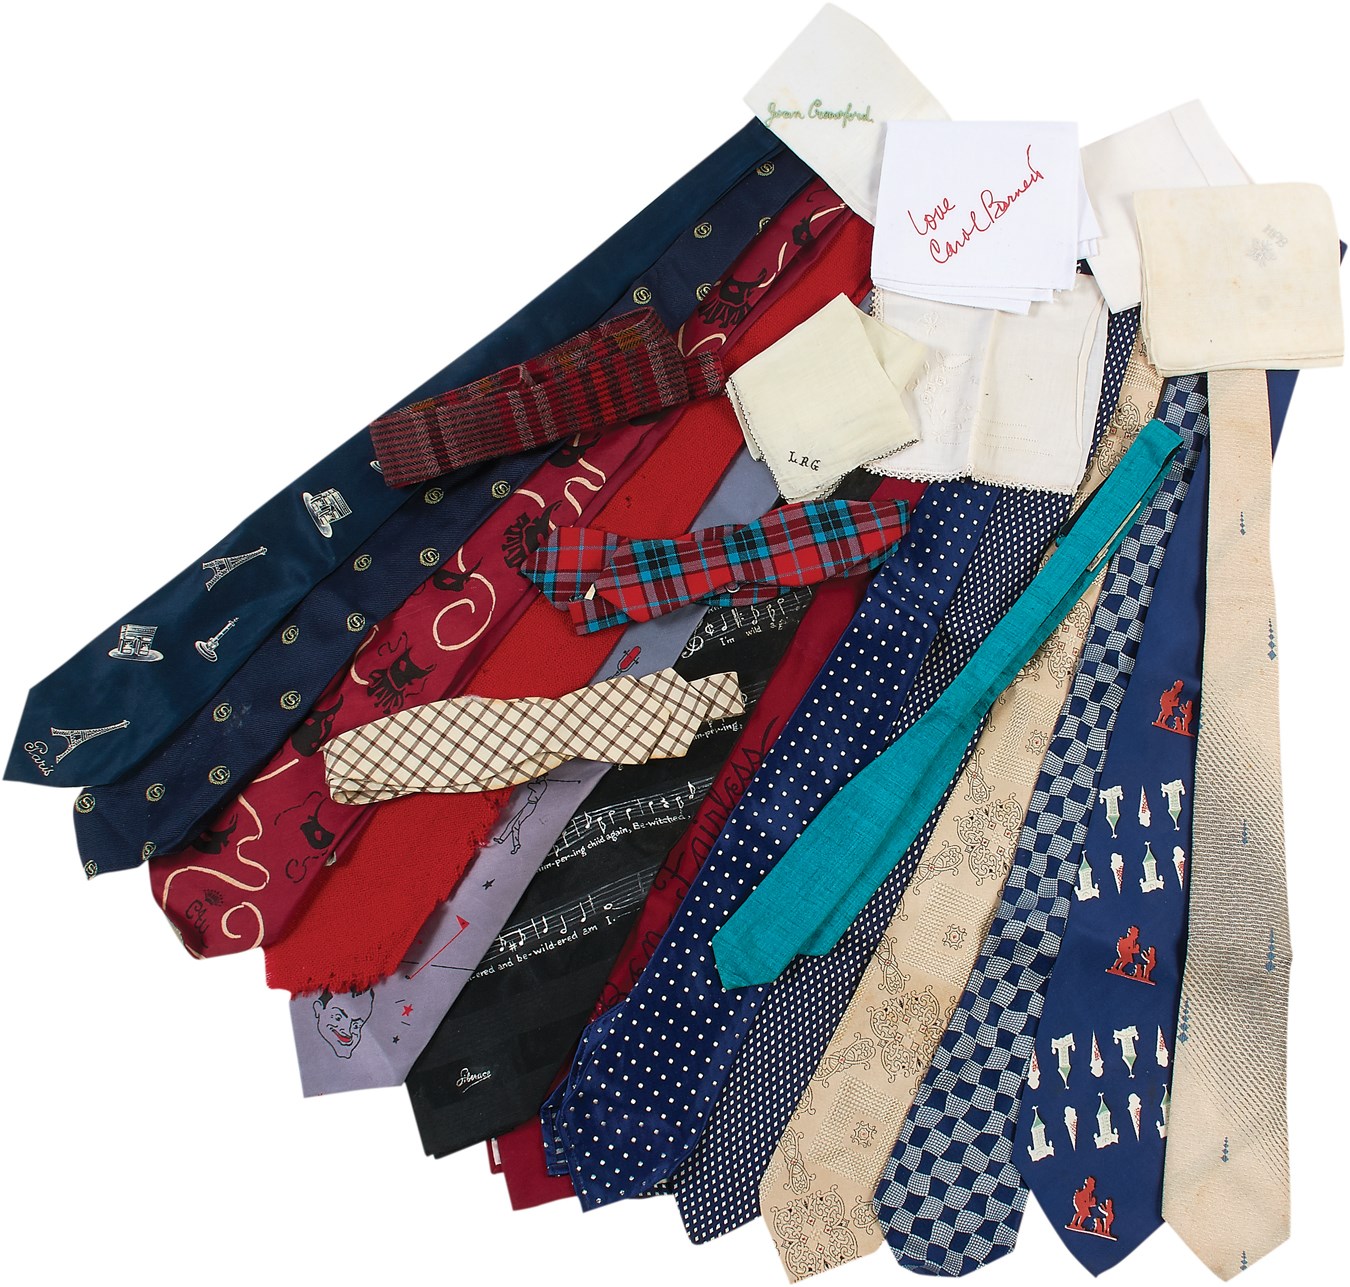 - Celebrity Owned Tie & Handkerchief Collection - Gifted to Schendel (100+)